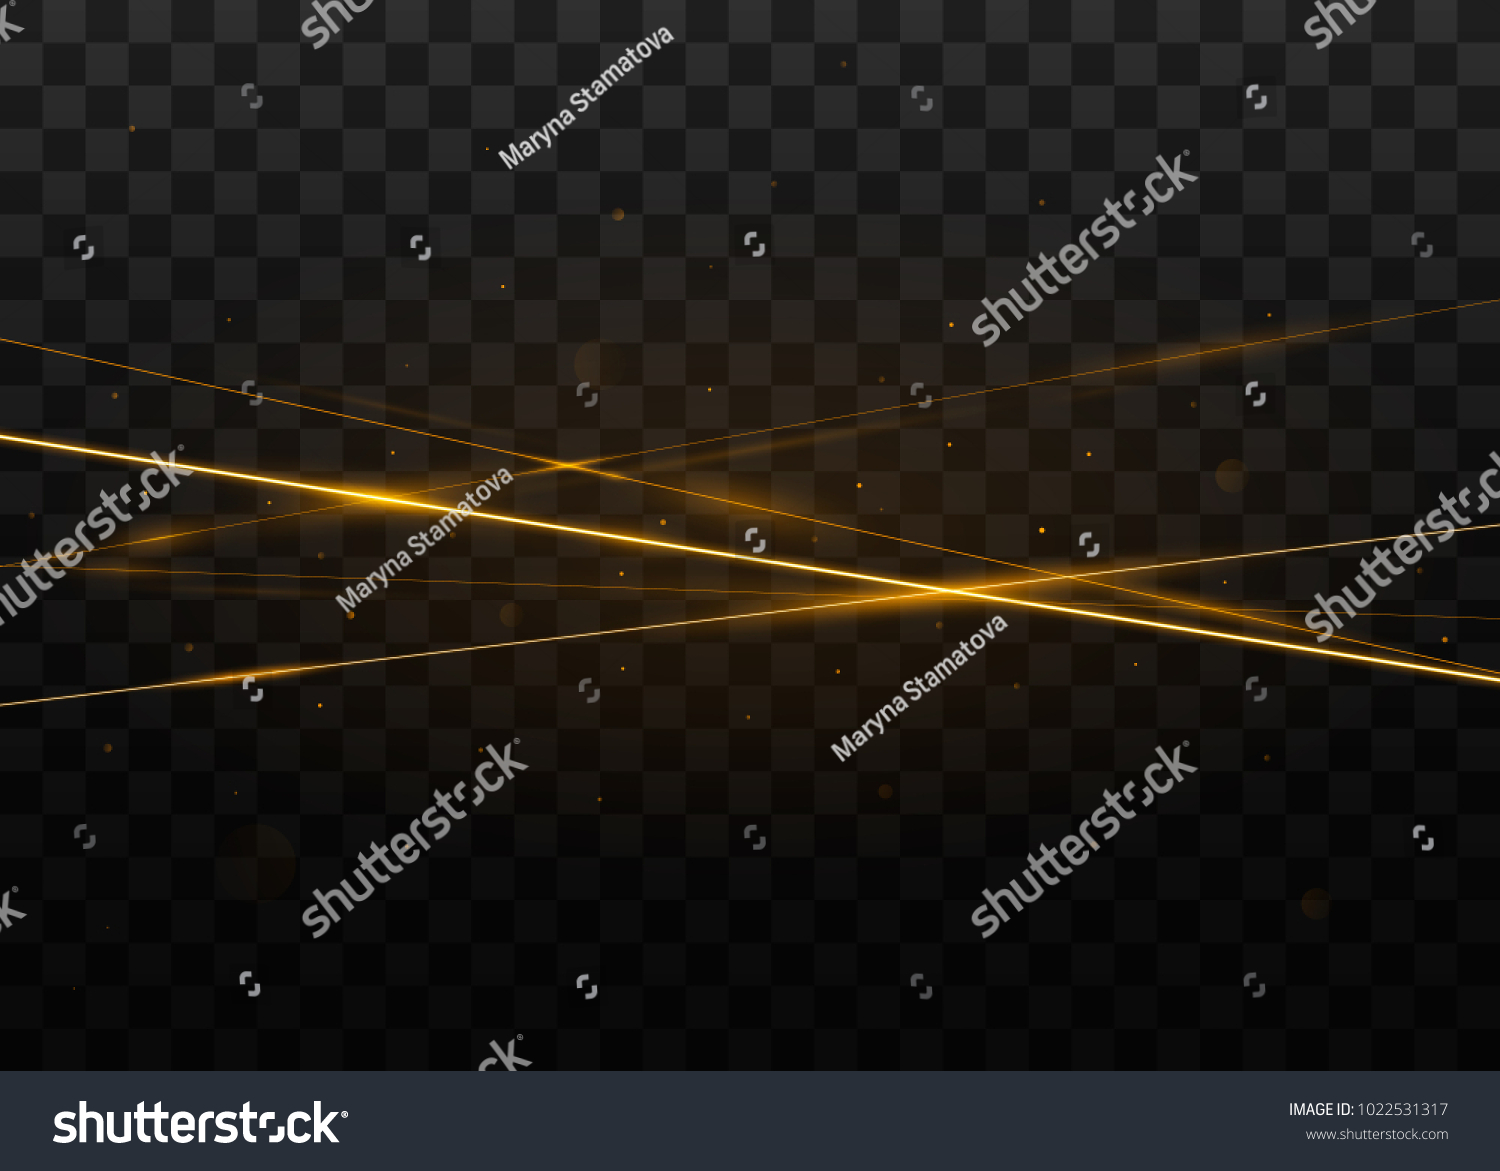 Abstract golden laser beams. Isolated on transparent black background. Vector illustration, eps 10. #1022531317